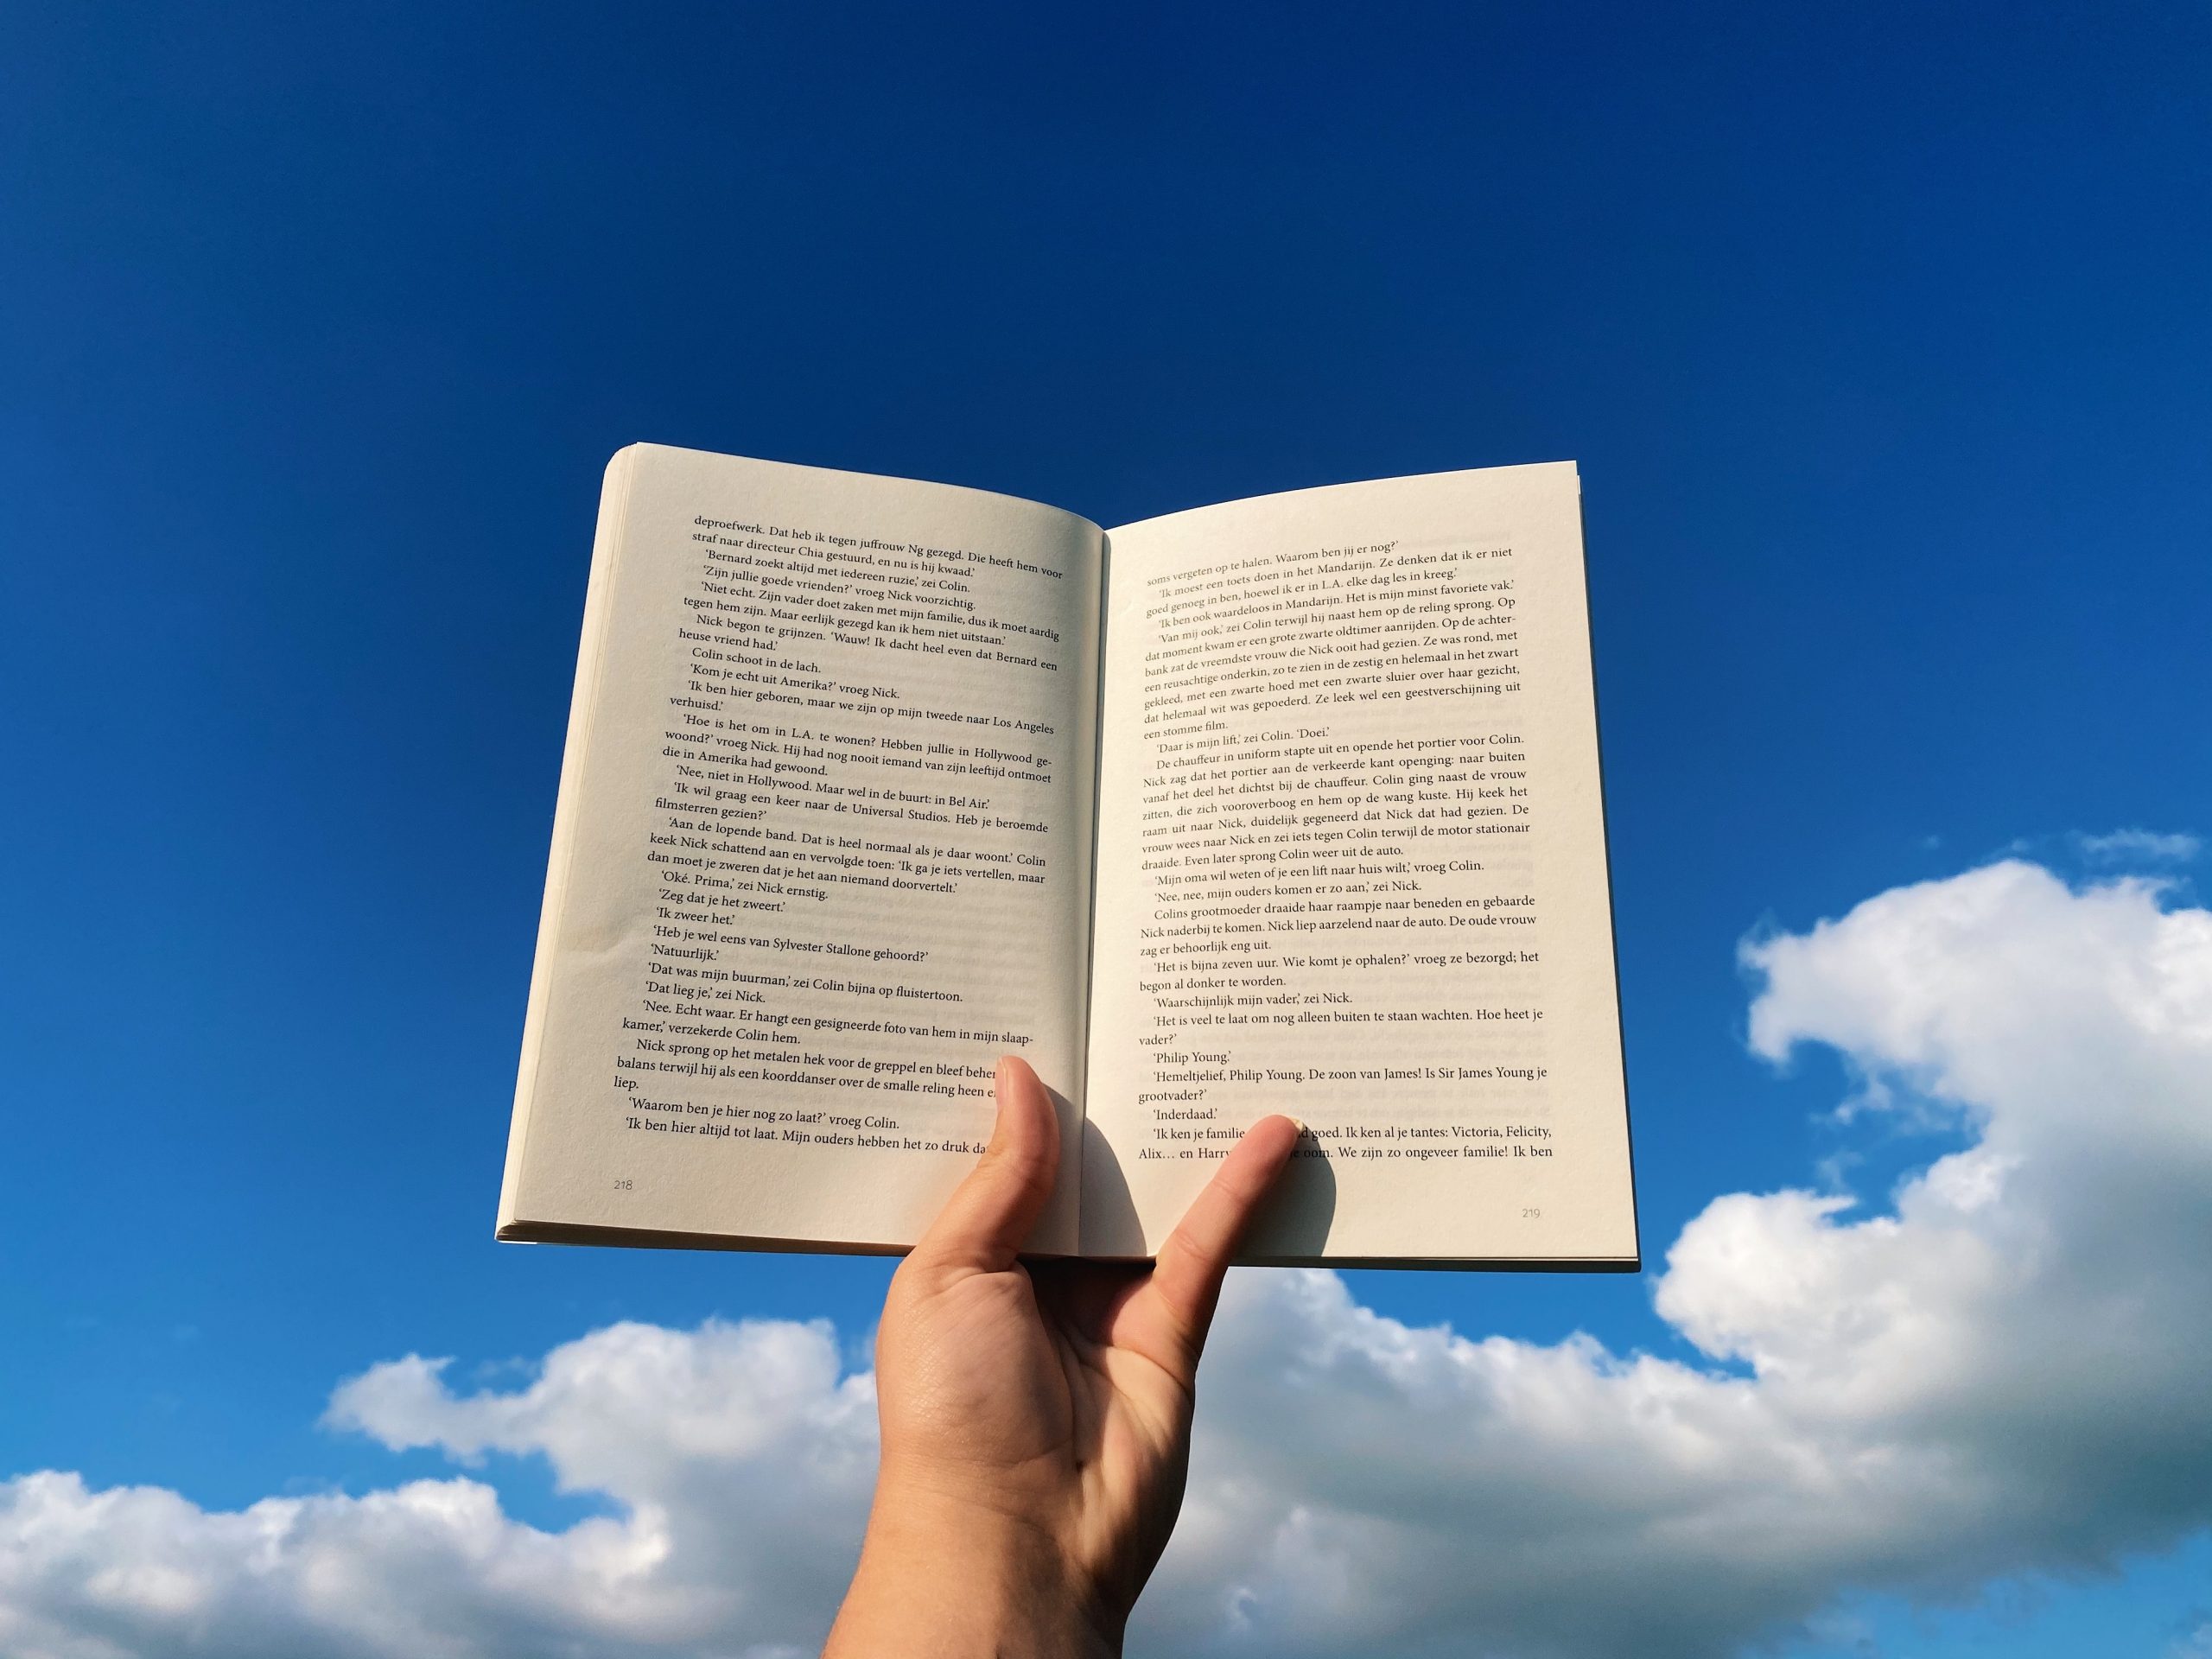 5 Life-Changing Books to Read in 2021 - hand holding a book in the clouds